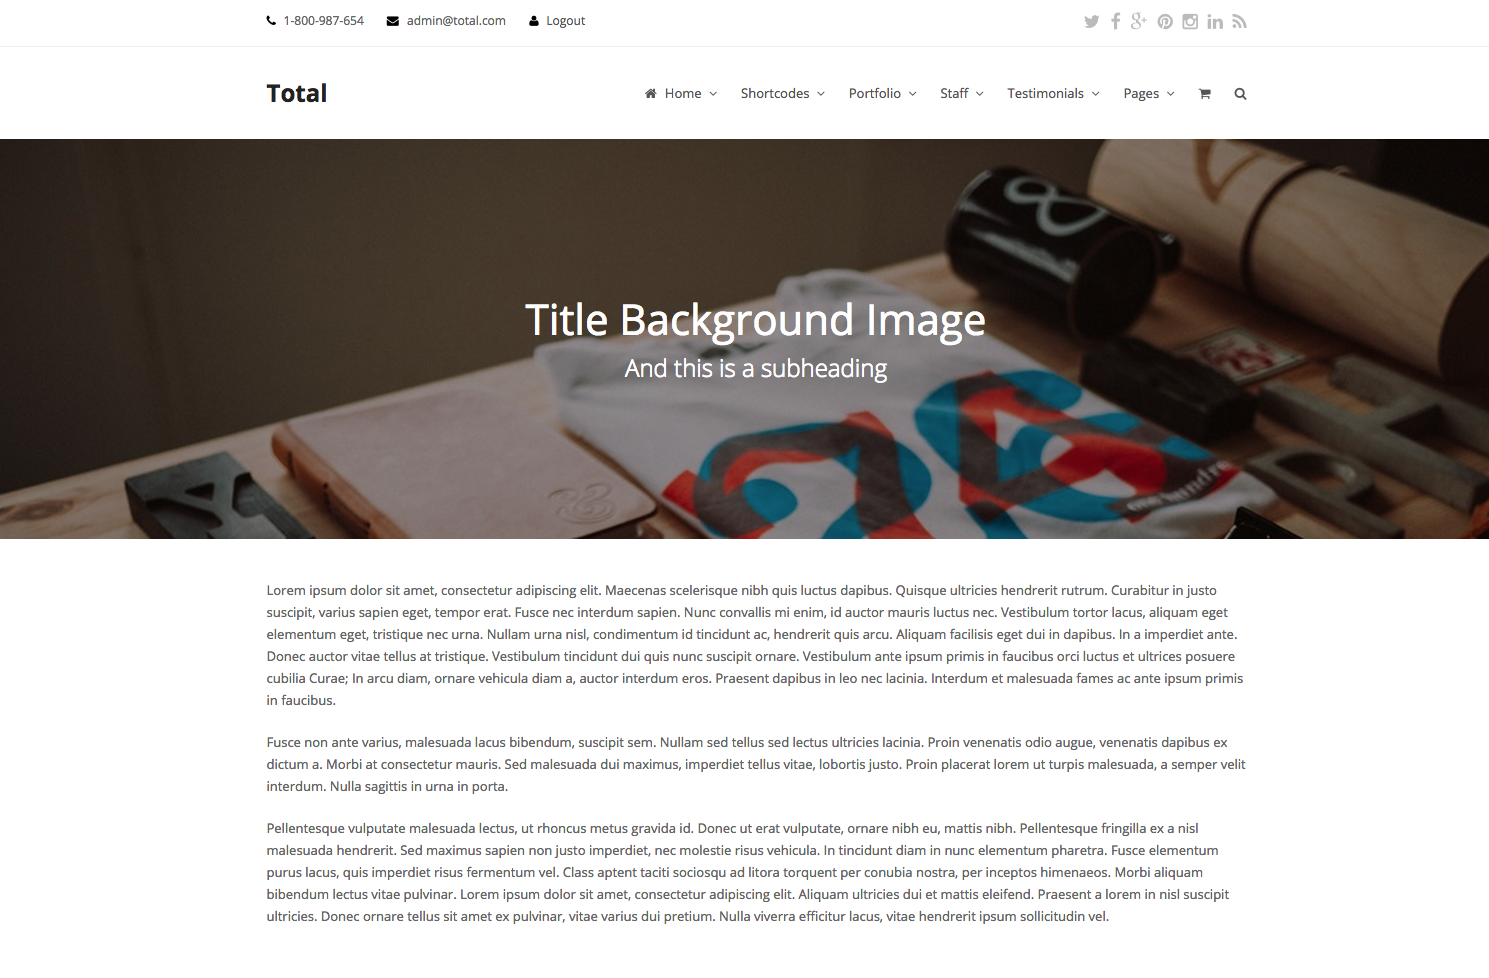 page-header-background-image-example